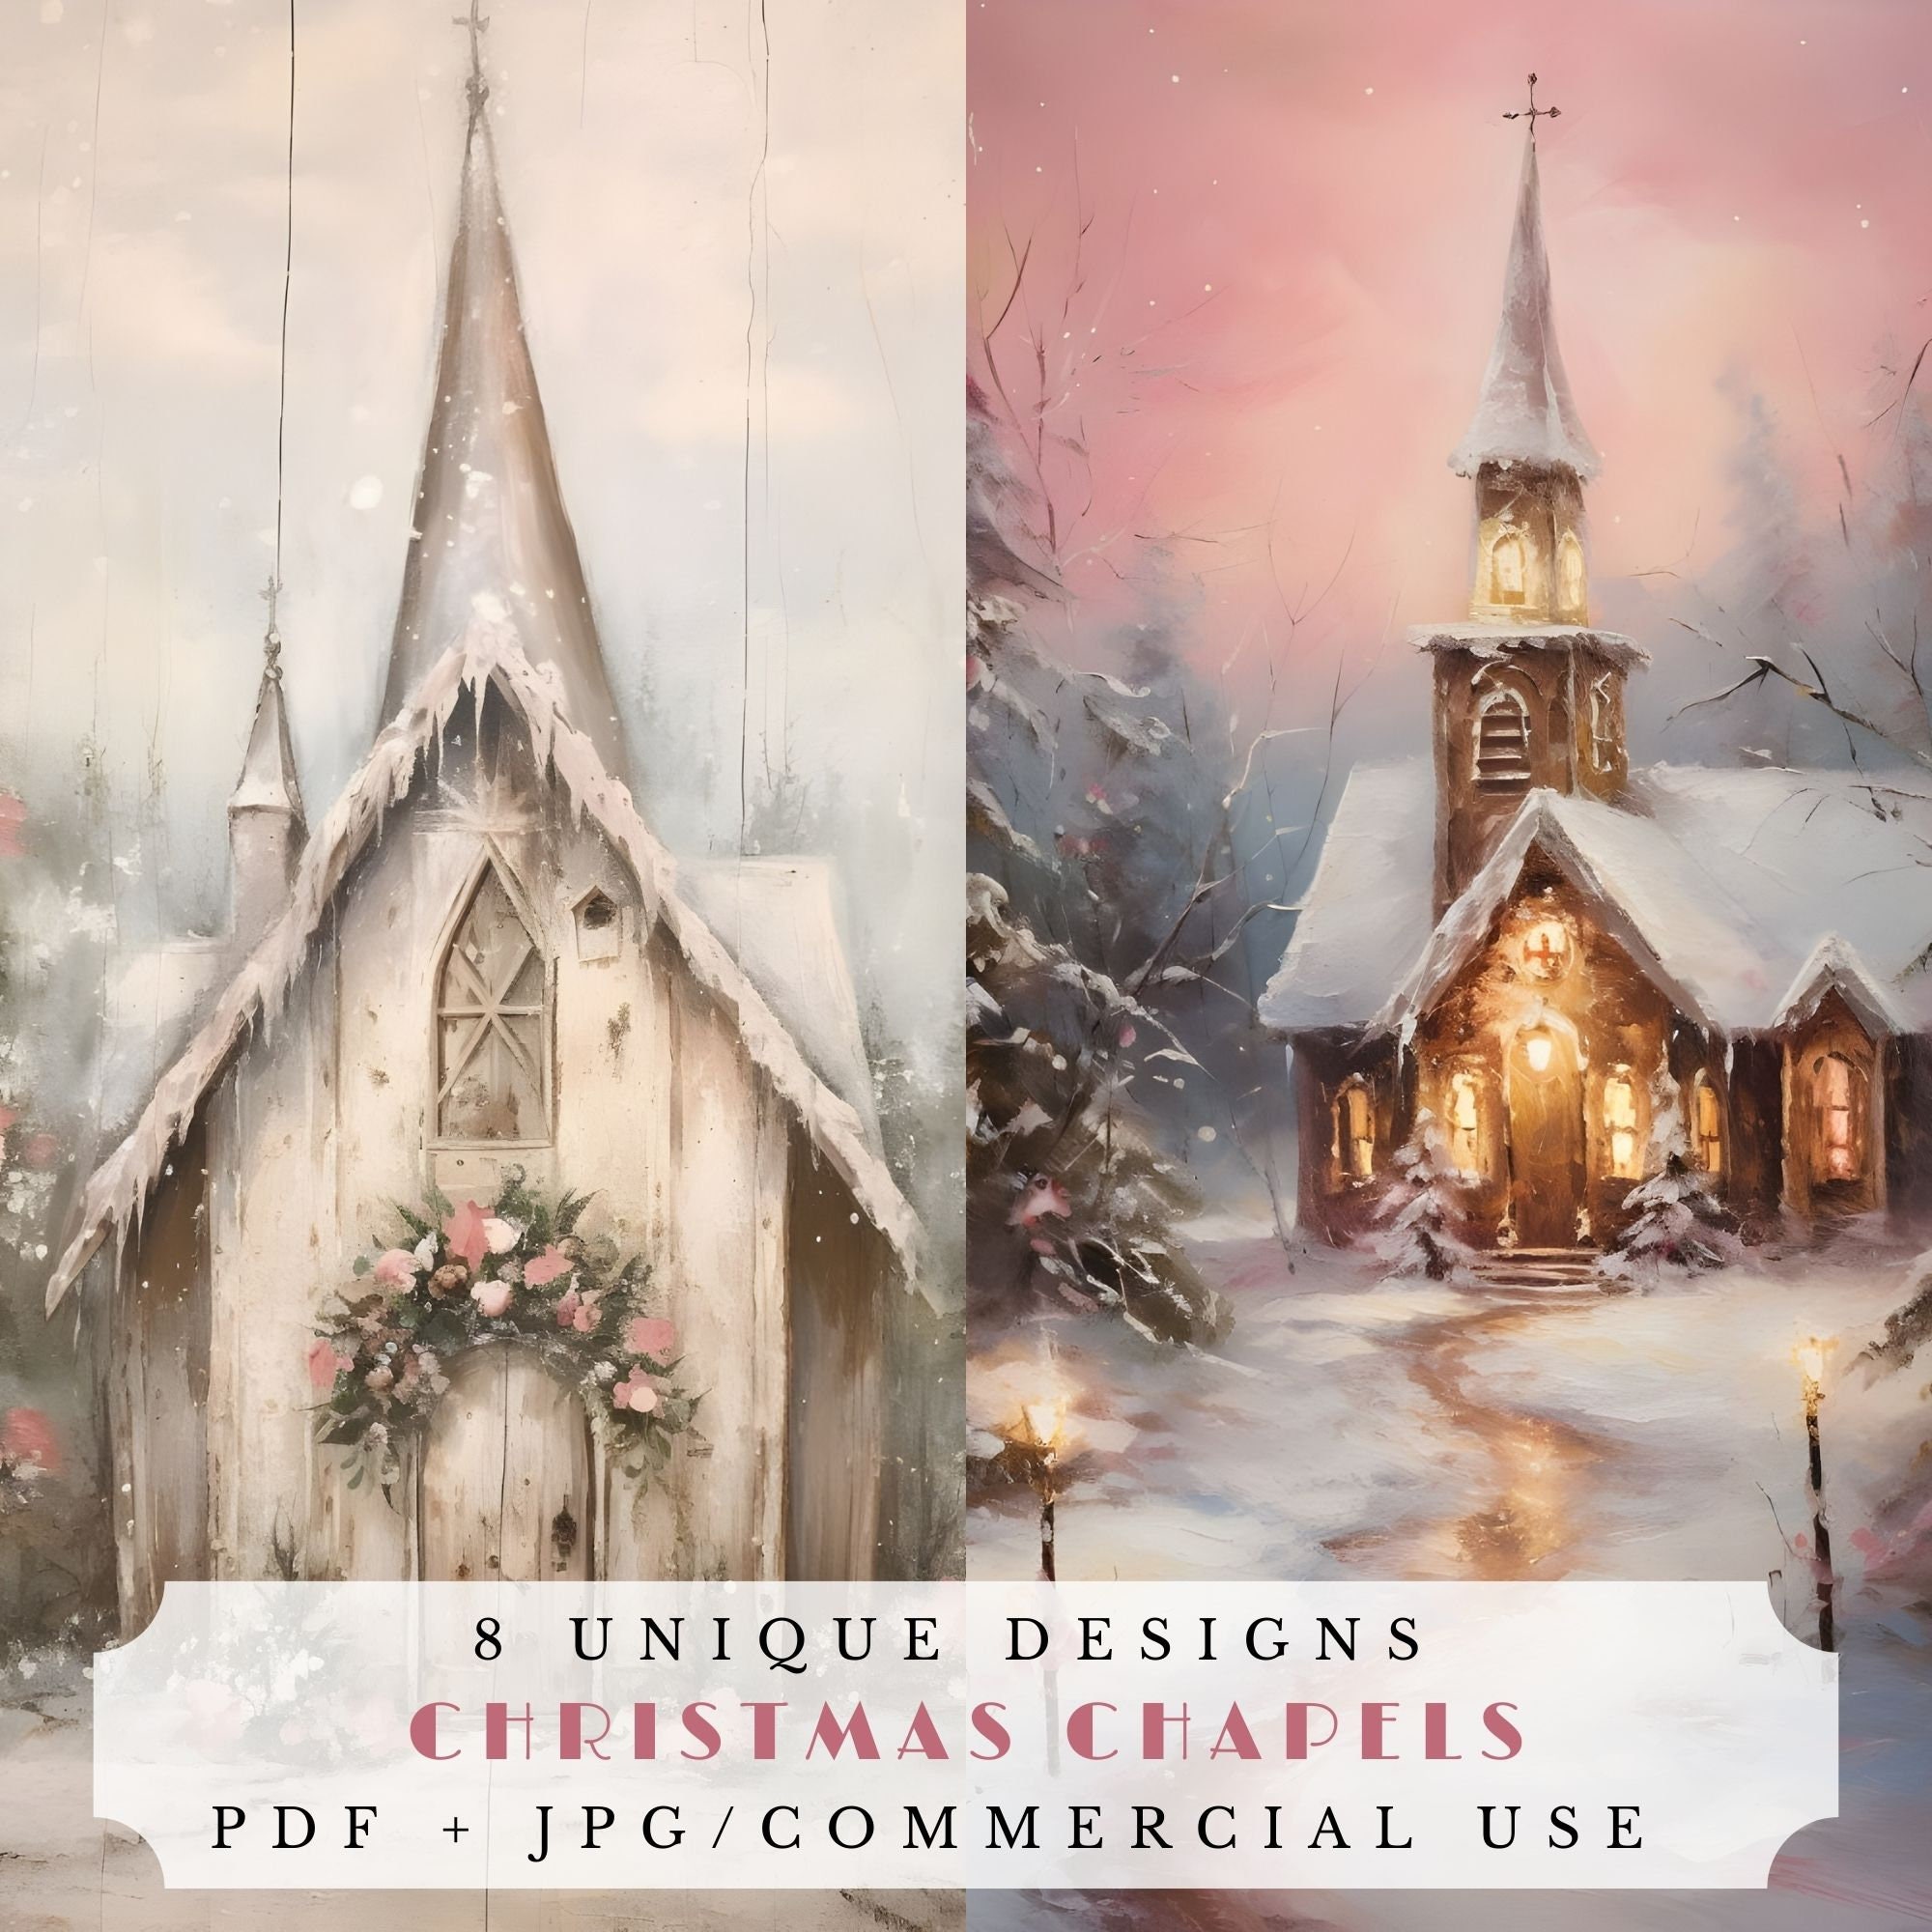 Winter Scenes Scrapbook Paper: 20 Double-Sided Sheets of Christmas Wintry  Scenes for Scrapbooking, Junk Journals, Card Making, Decoupage, Origami